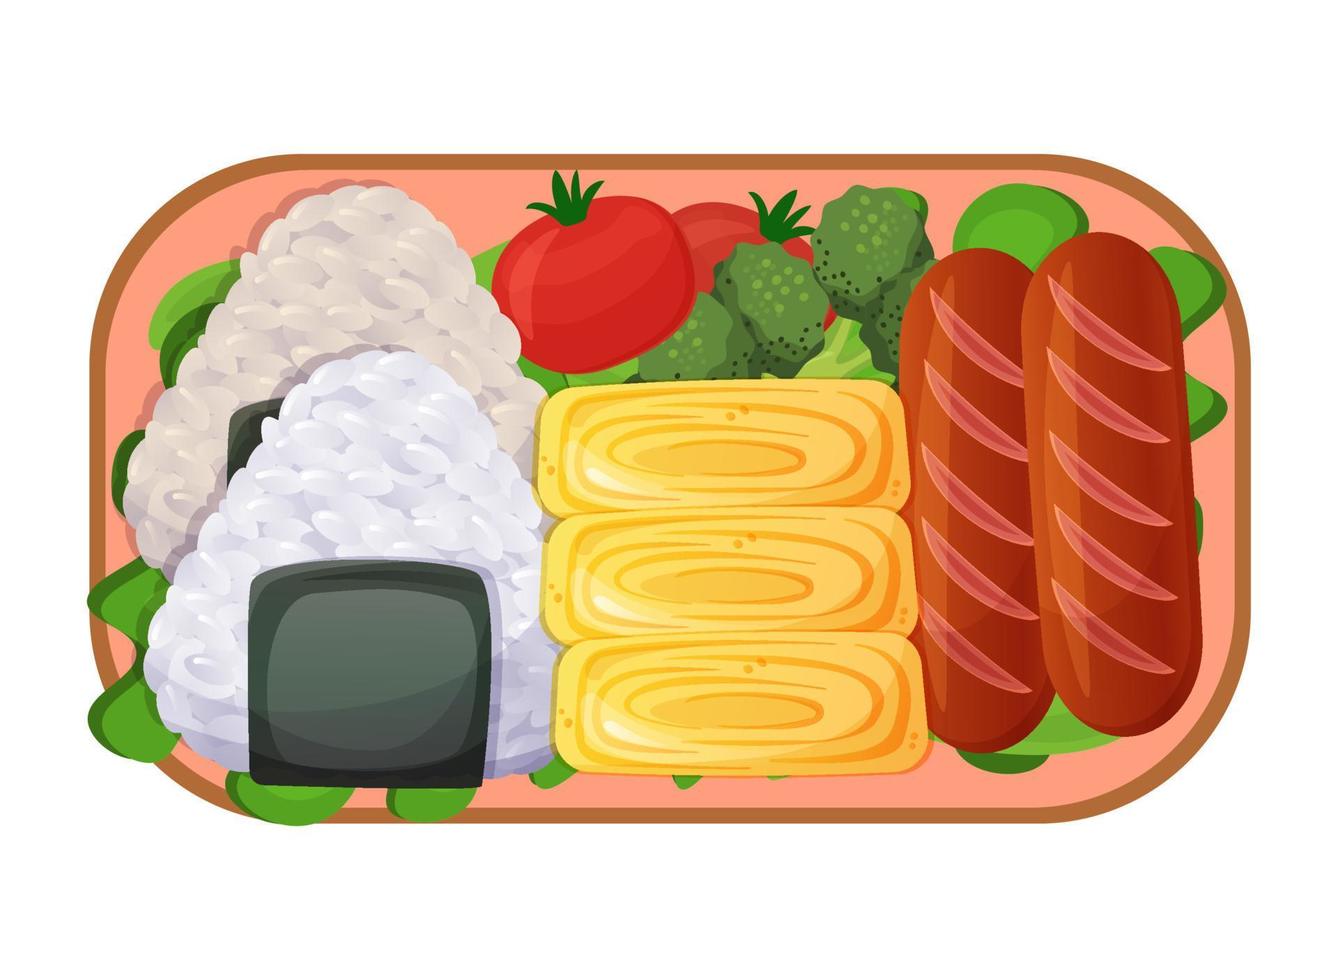 Bento Japanese lunch box with onigiri, vegetables, eggs, sausages. Asian food. Colorful vector illustration isolated on white background.